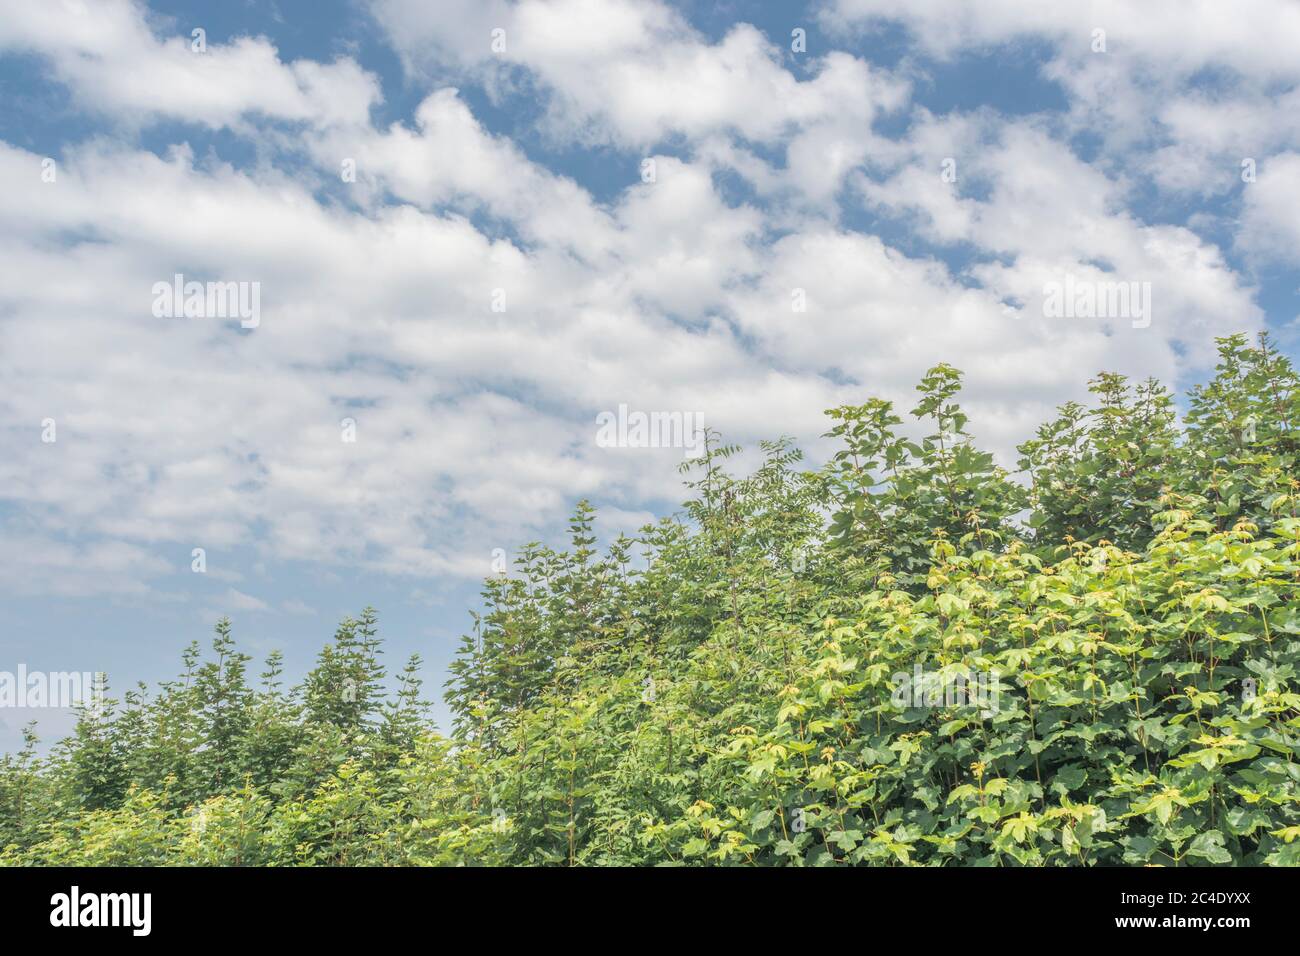 Tall Cornish hedgeline / boundary line with blue sky and fluffy white clouds above. Metaphor good weather, boundaries, hedge lines, Cornwall hedge. Stock Photo